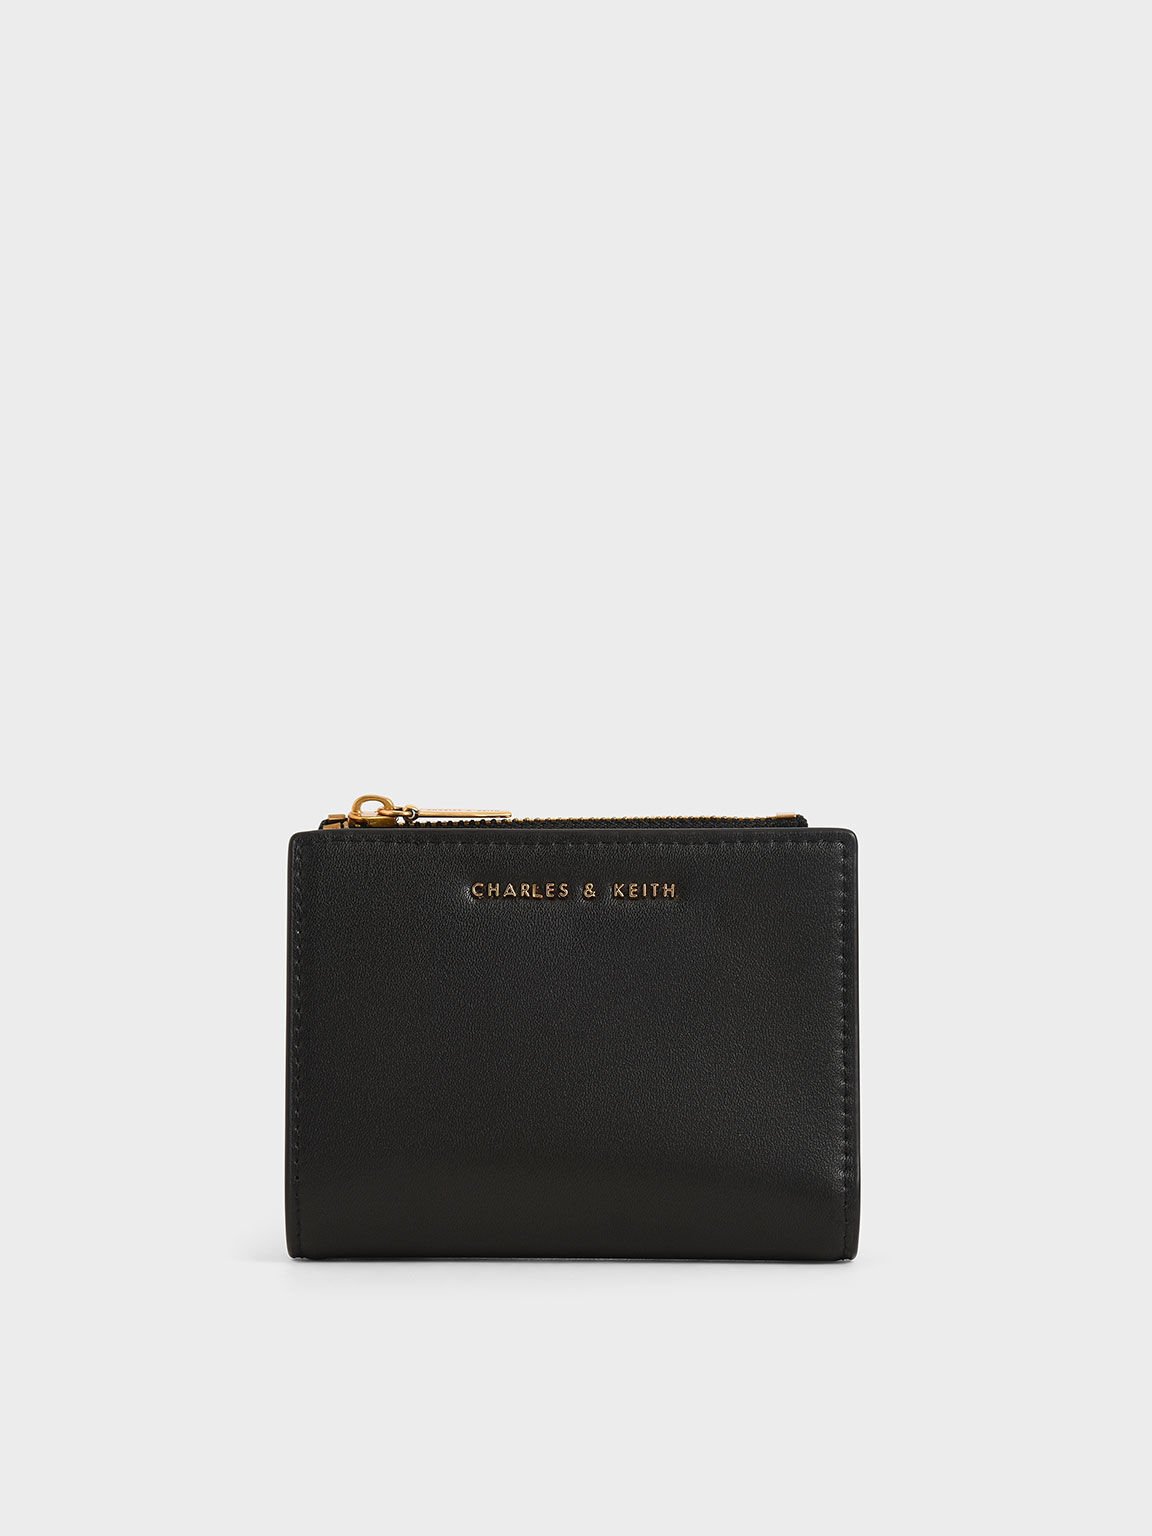 Women's Wallets | Shop Exclusive Styles | CHARLES & KEITH US